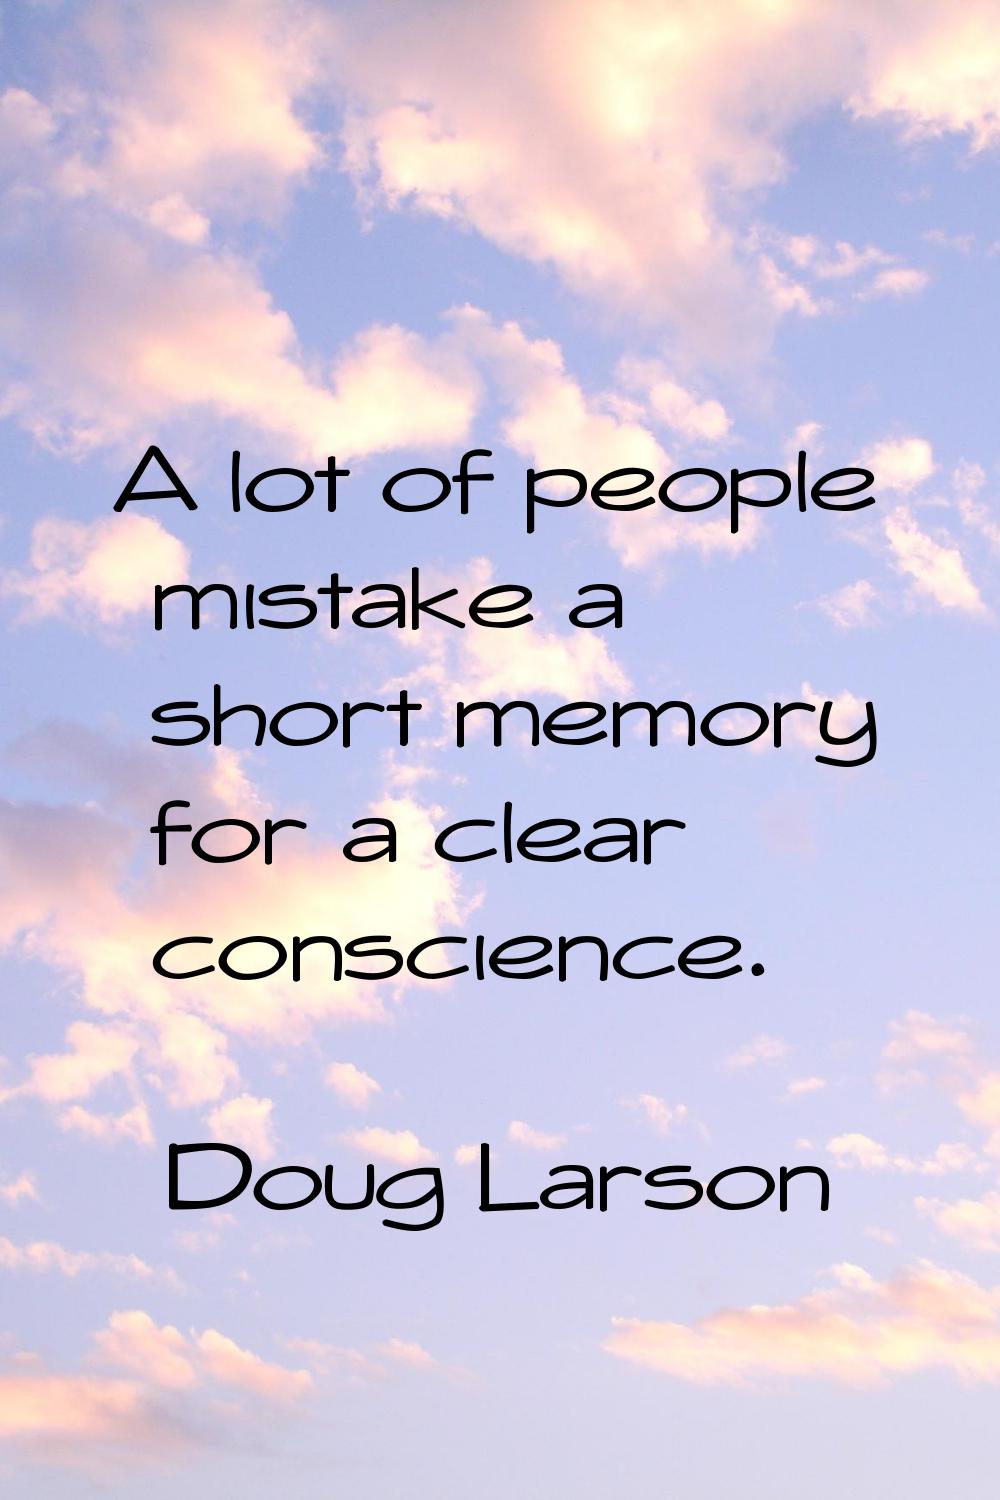 A lot of people mistake a short memory for a clear conscience.